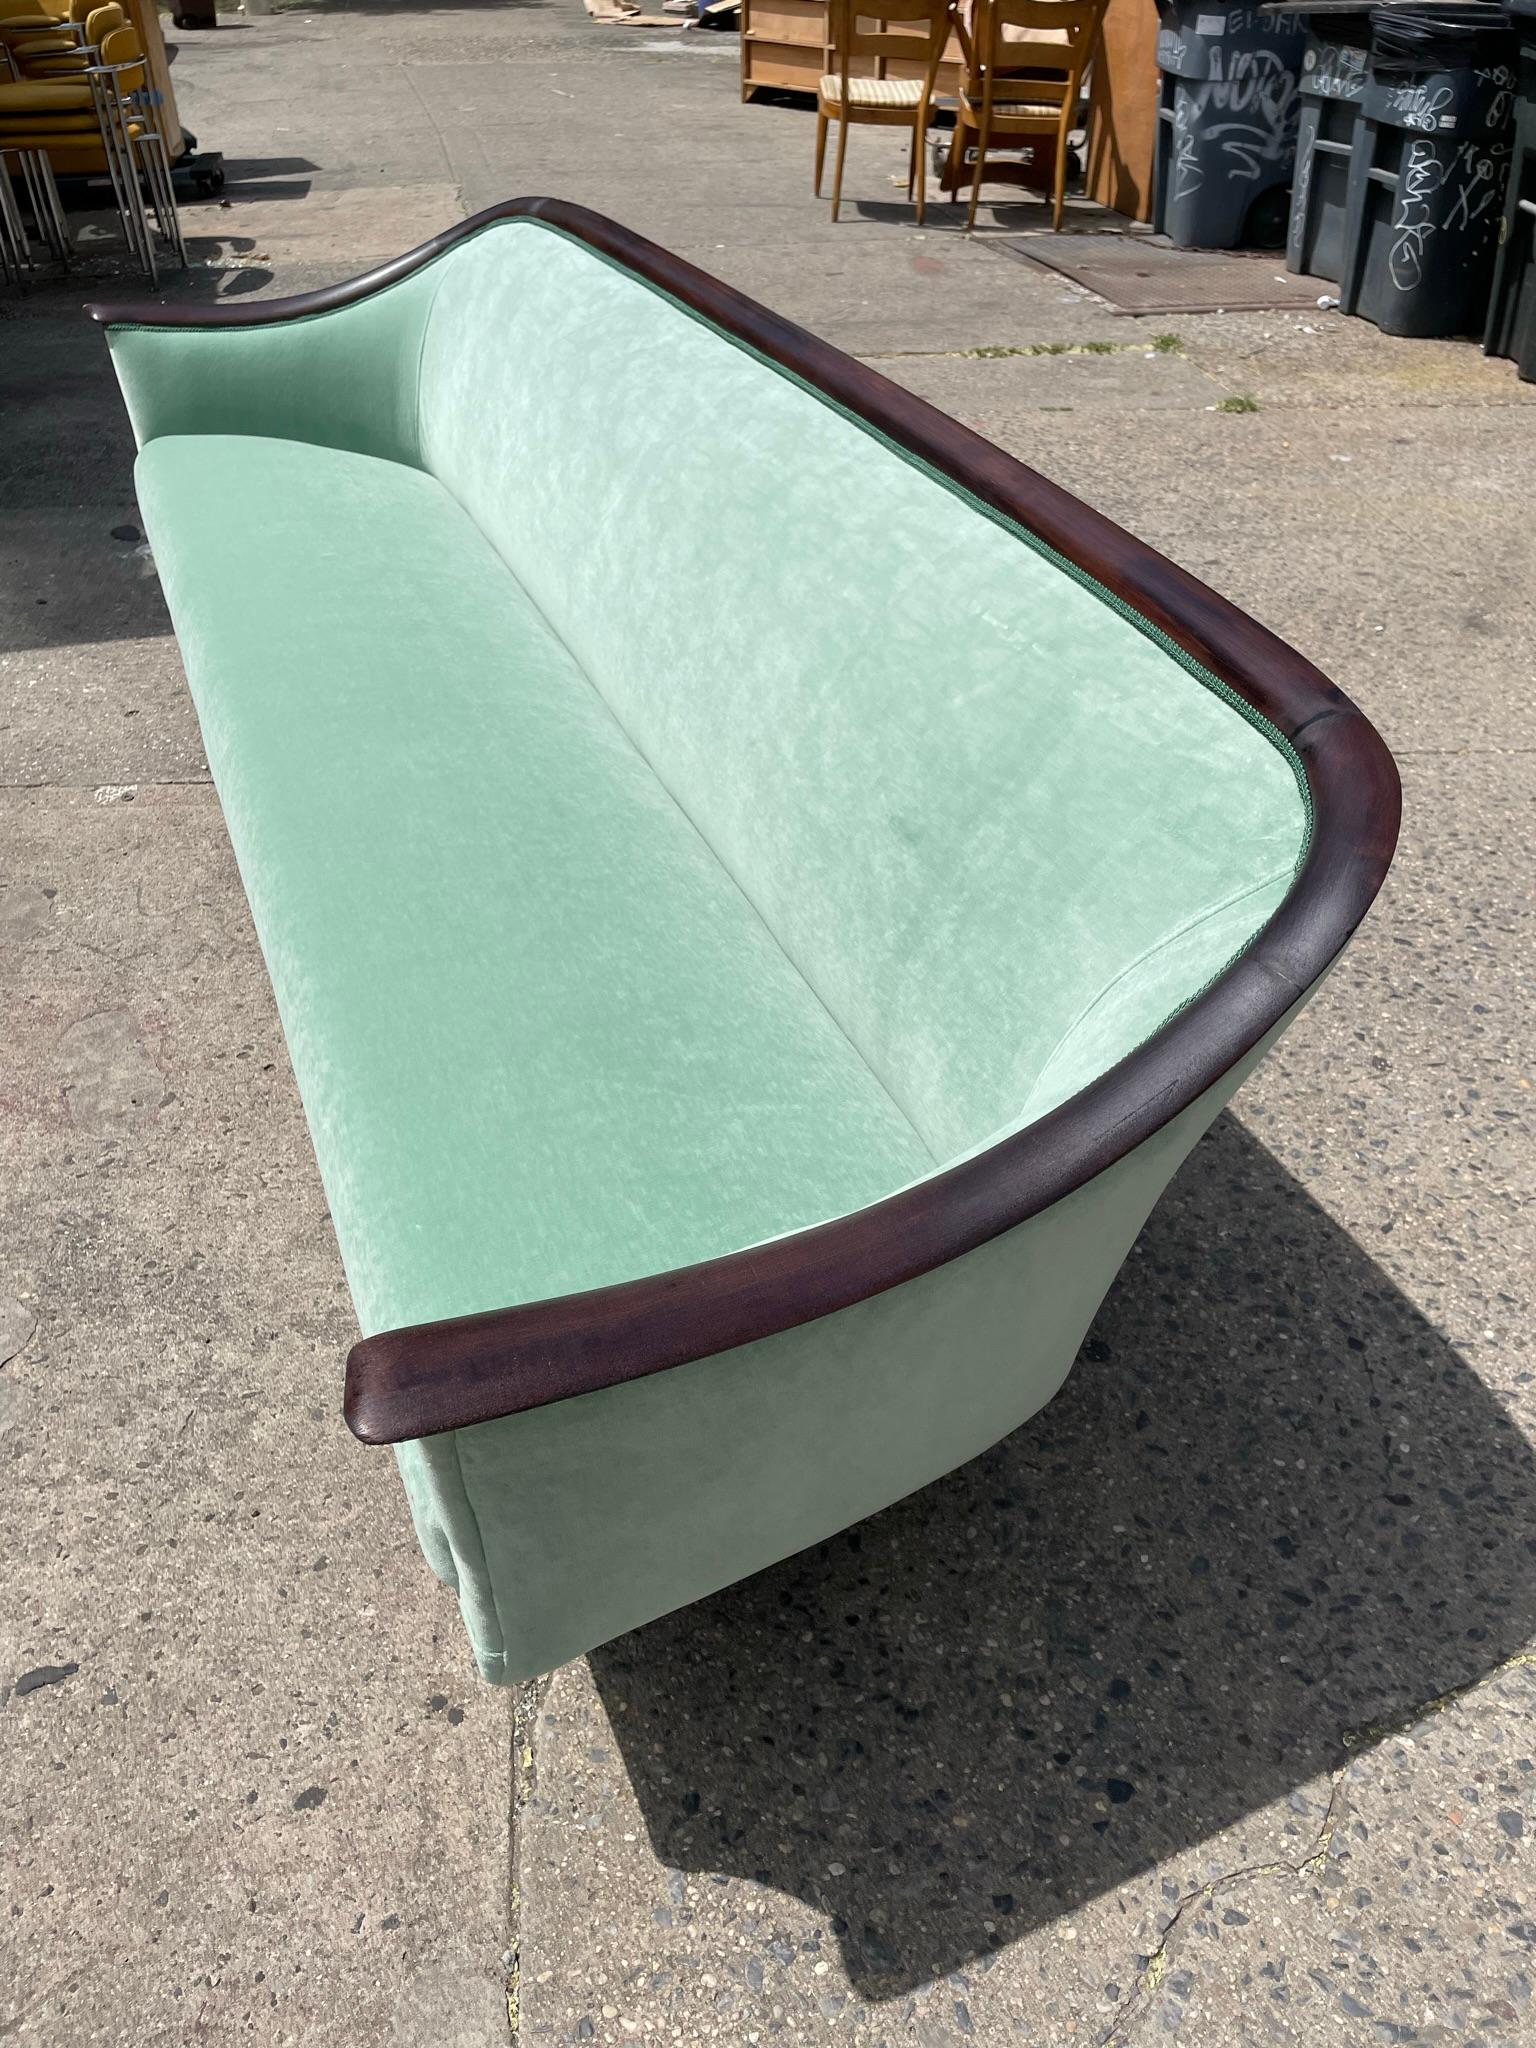    Completely reupholstered sofa
In an amazing green velvet. This sofa has all new cushioning and the solid wood frame has been sanded and sealed. 
   This fabulous piece is very comfortable and makes a great statement piece in any home. 
   If you